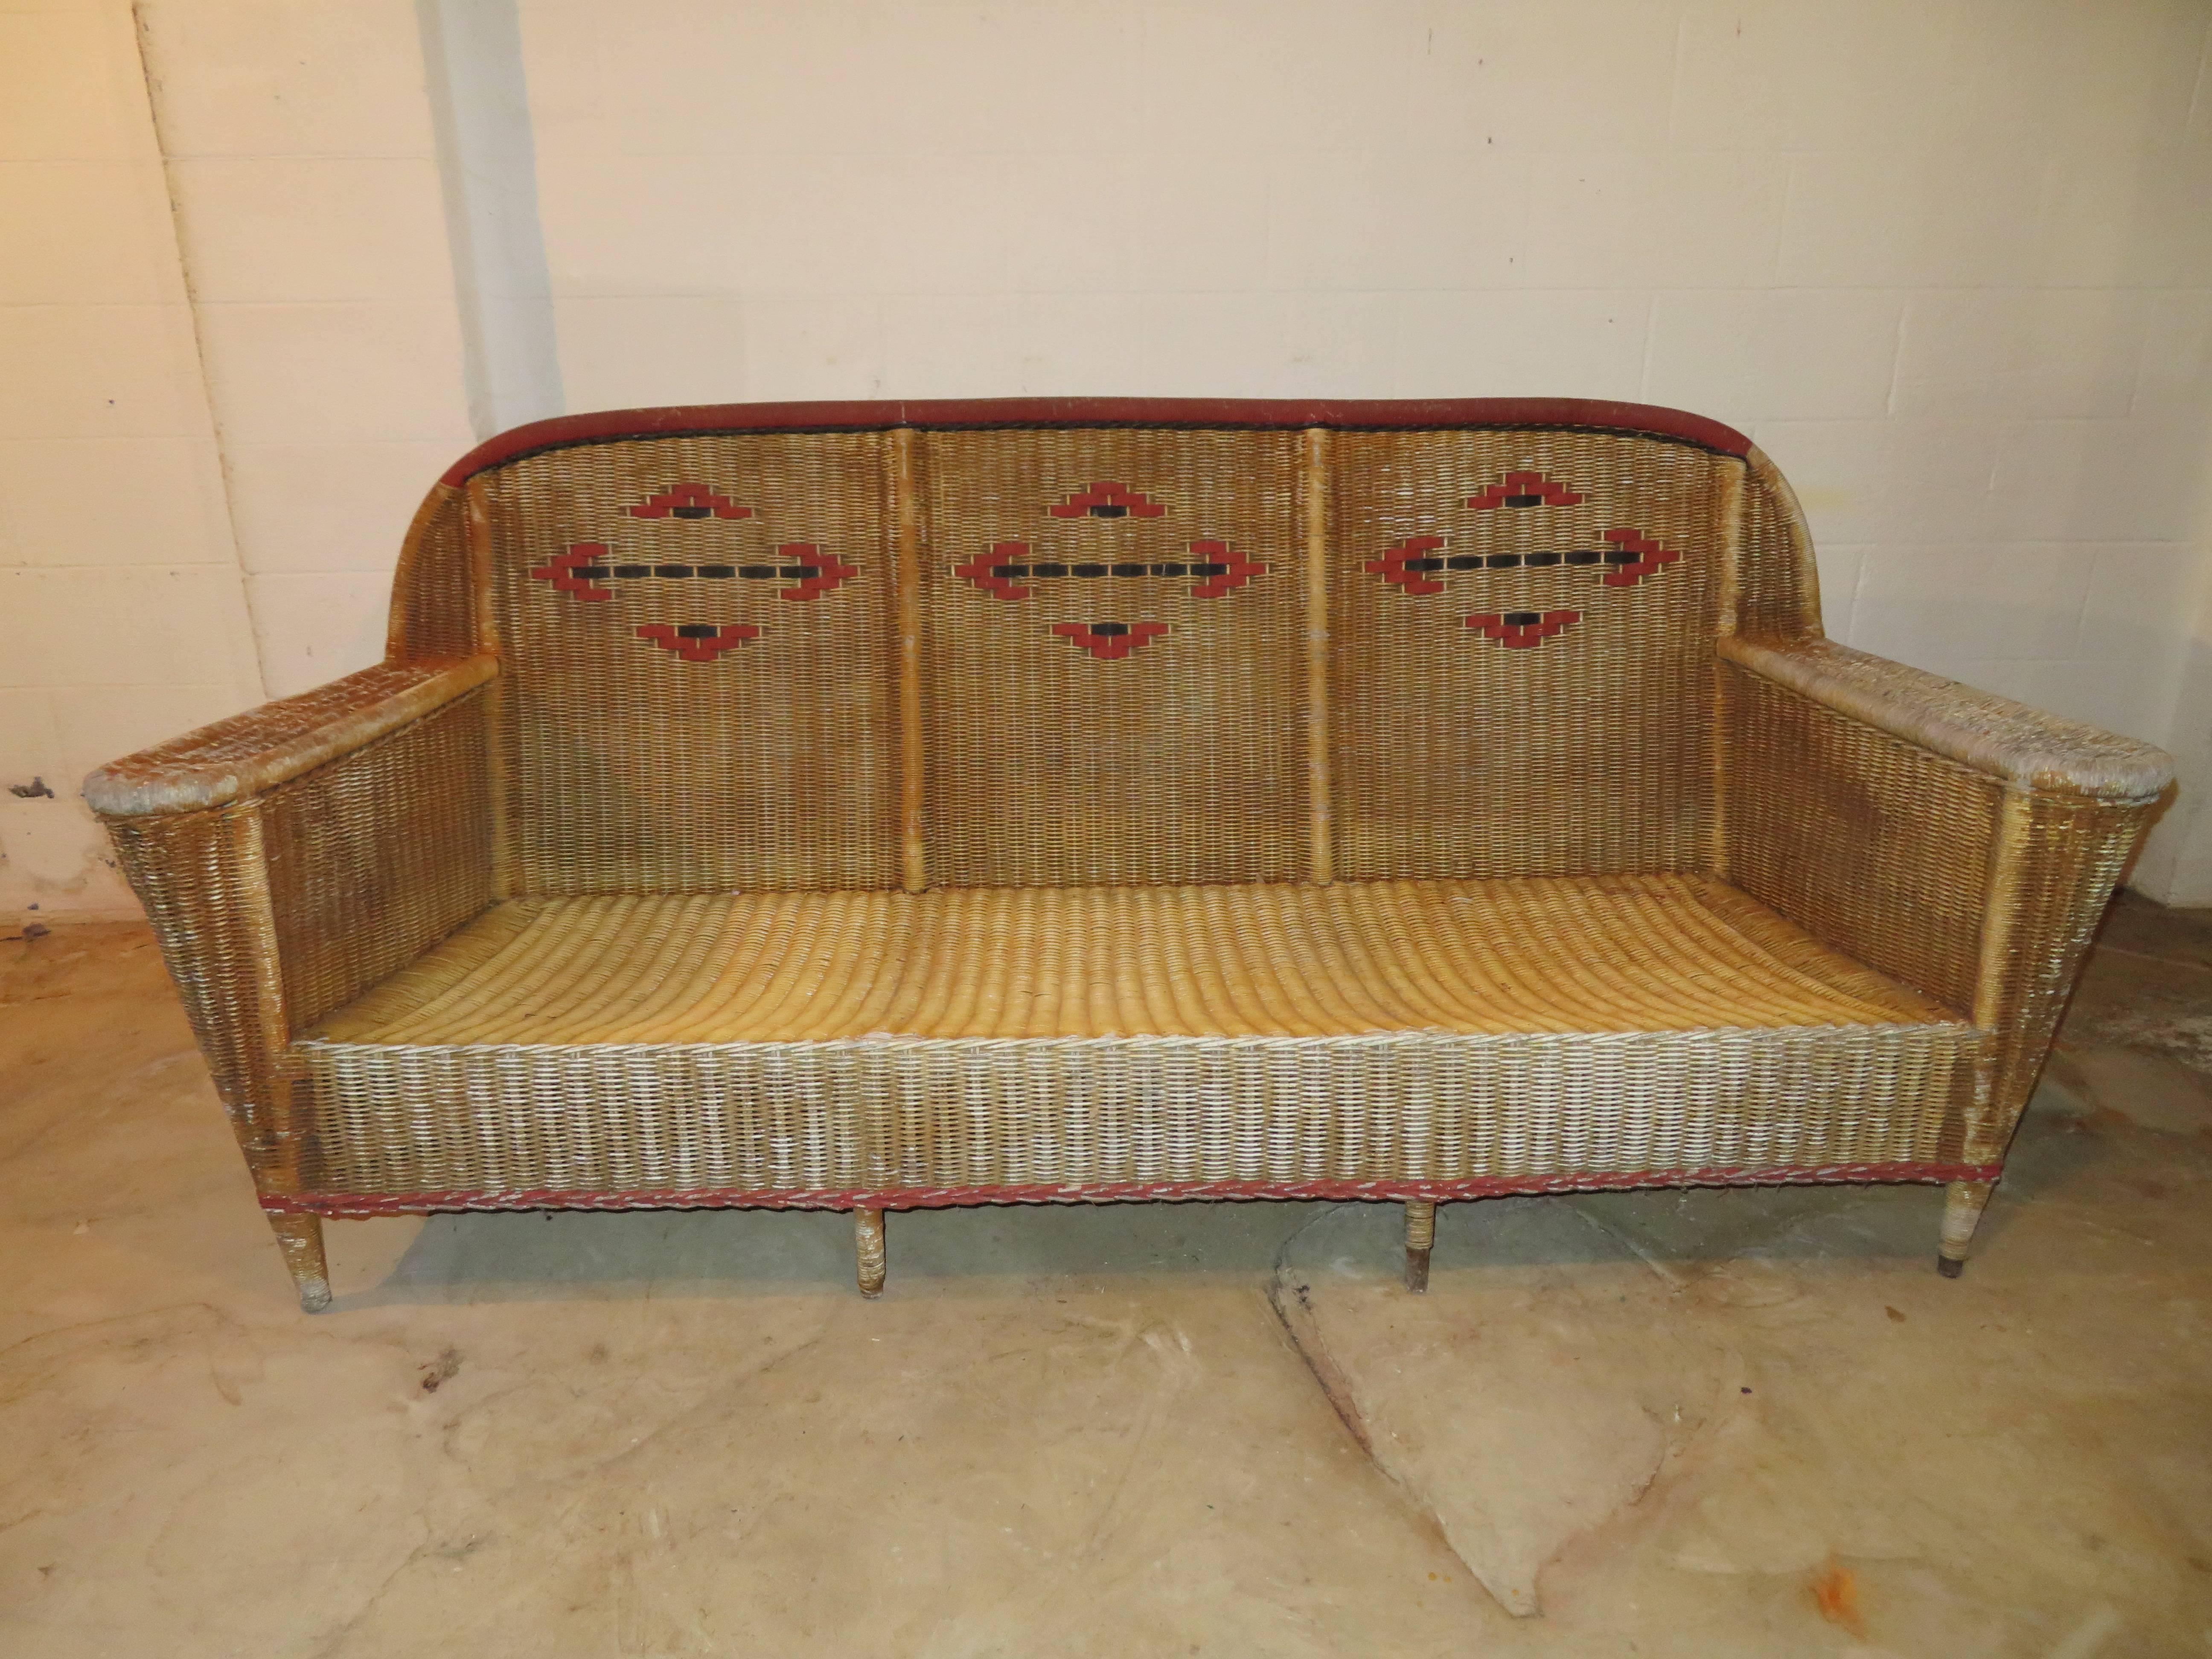 Fabulous and rare Art Deco seven-piece wicker set from the late 1940s. This set will need a new paint job and new cushions but the wicker is in very nice vintage condition with only a few strands of missing wrap on some legs. Set includes two lounge